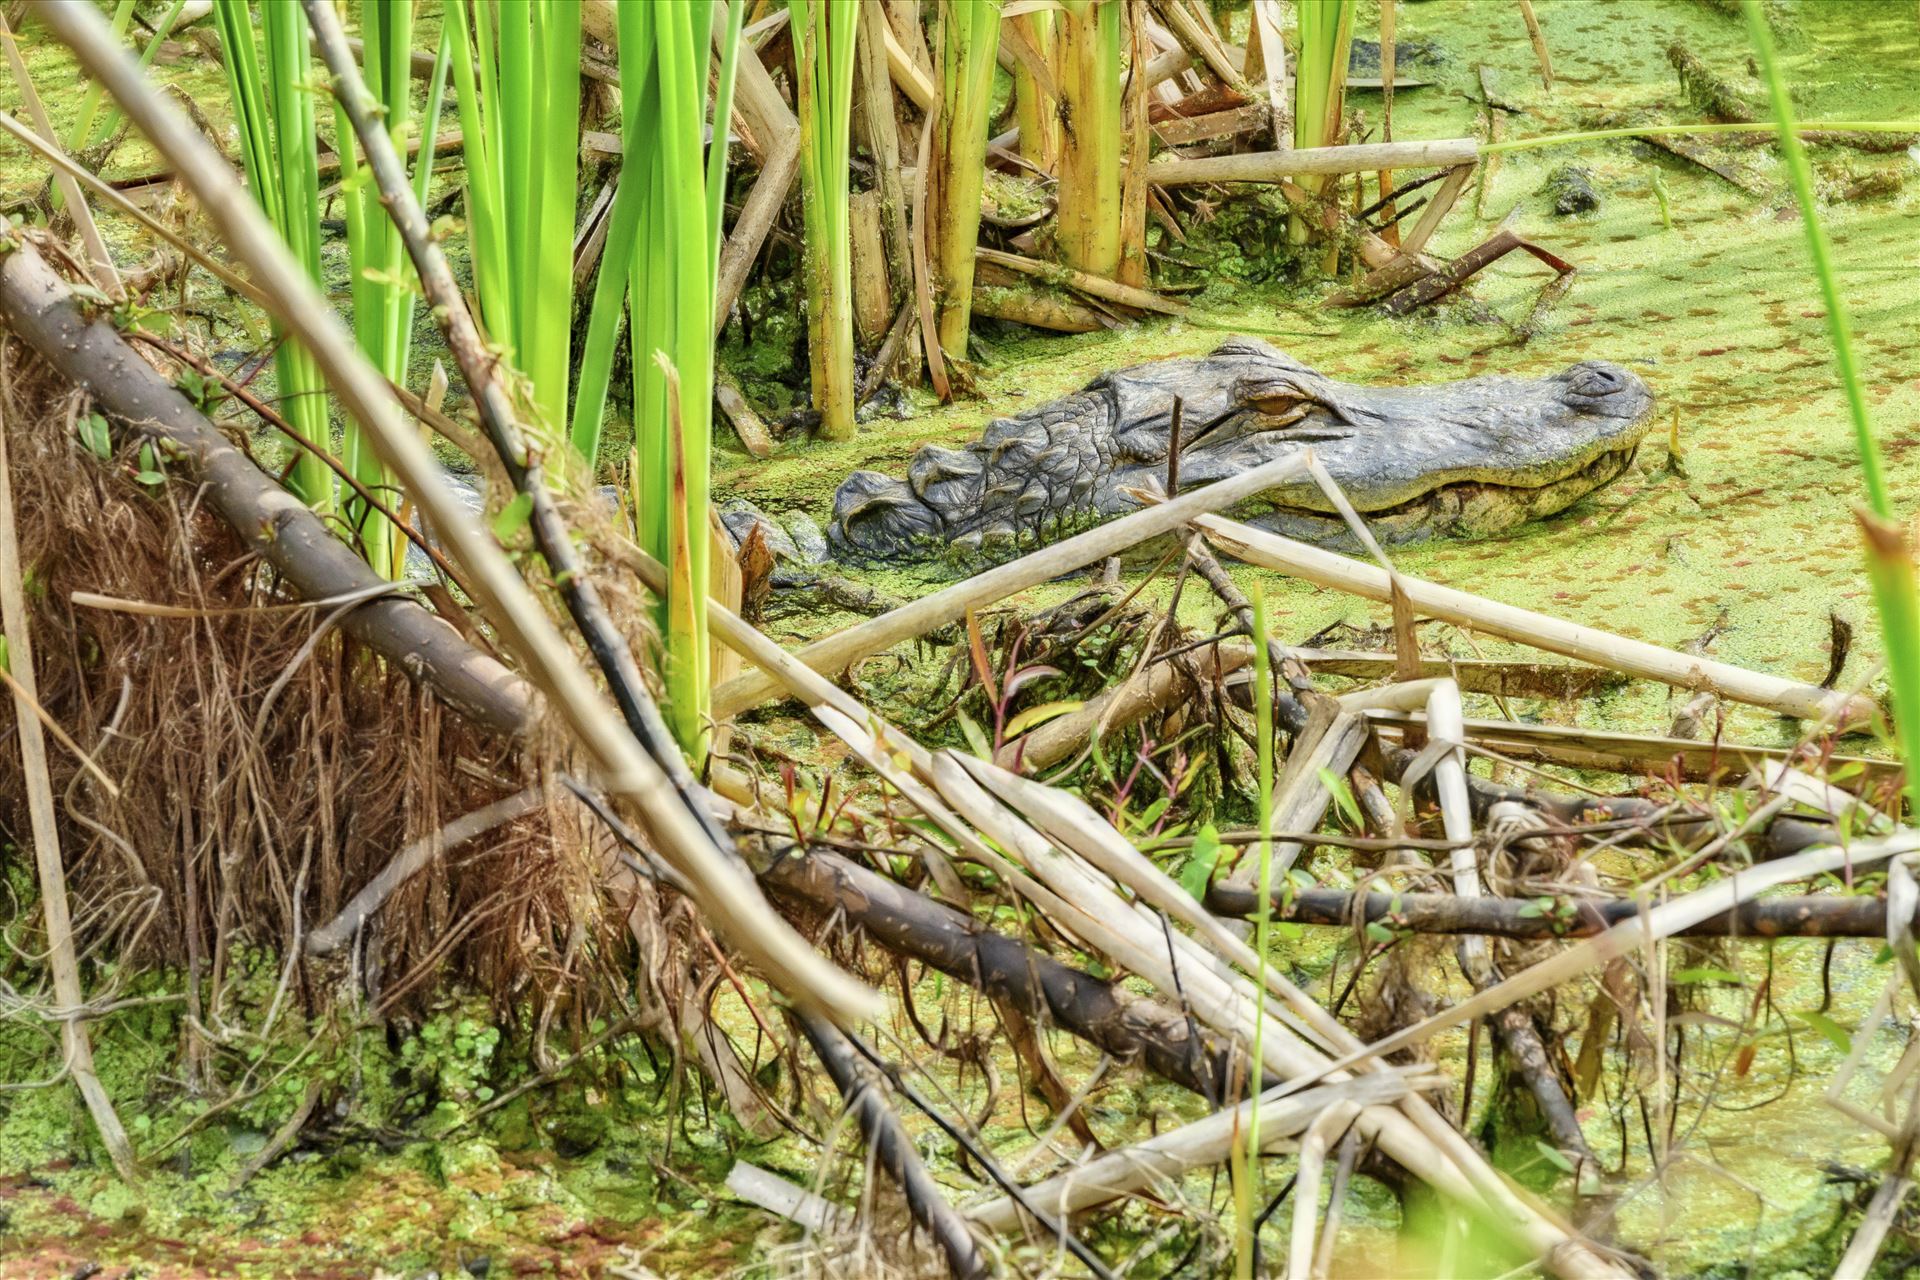 gator at gator lake in st. andrews state park 8108379.jpg  by Terry Kelly Photography